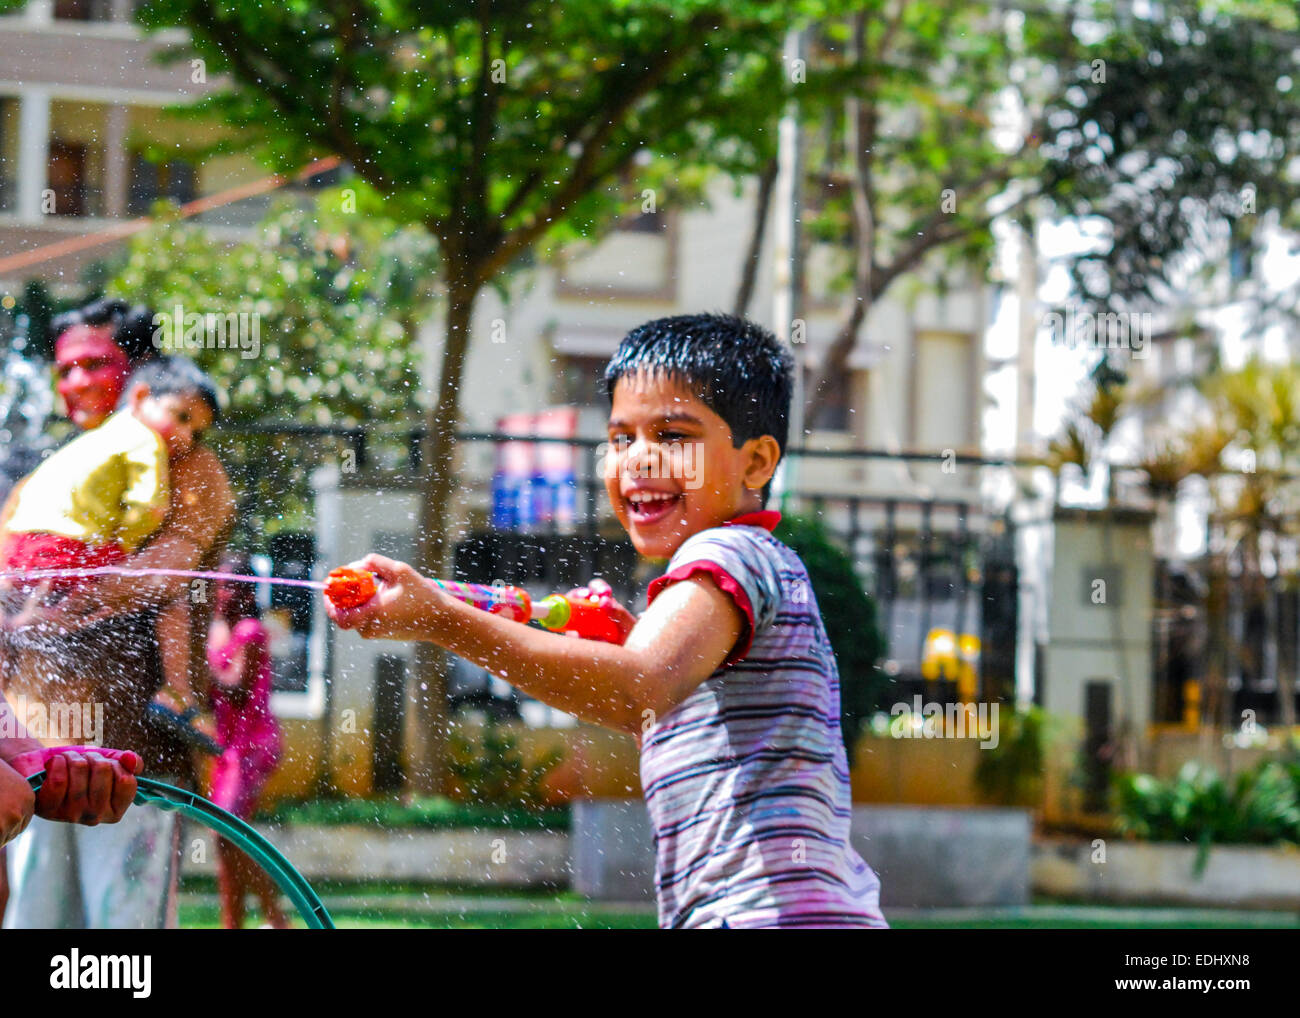 A young Indian boy playing with powder colors & water during the spring Hindu festival Holi also known as a festival of colors. Stock Photo